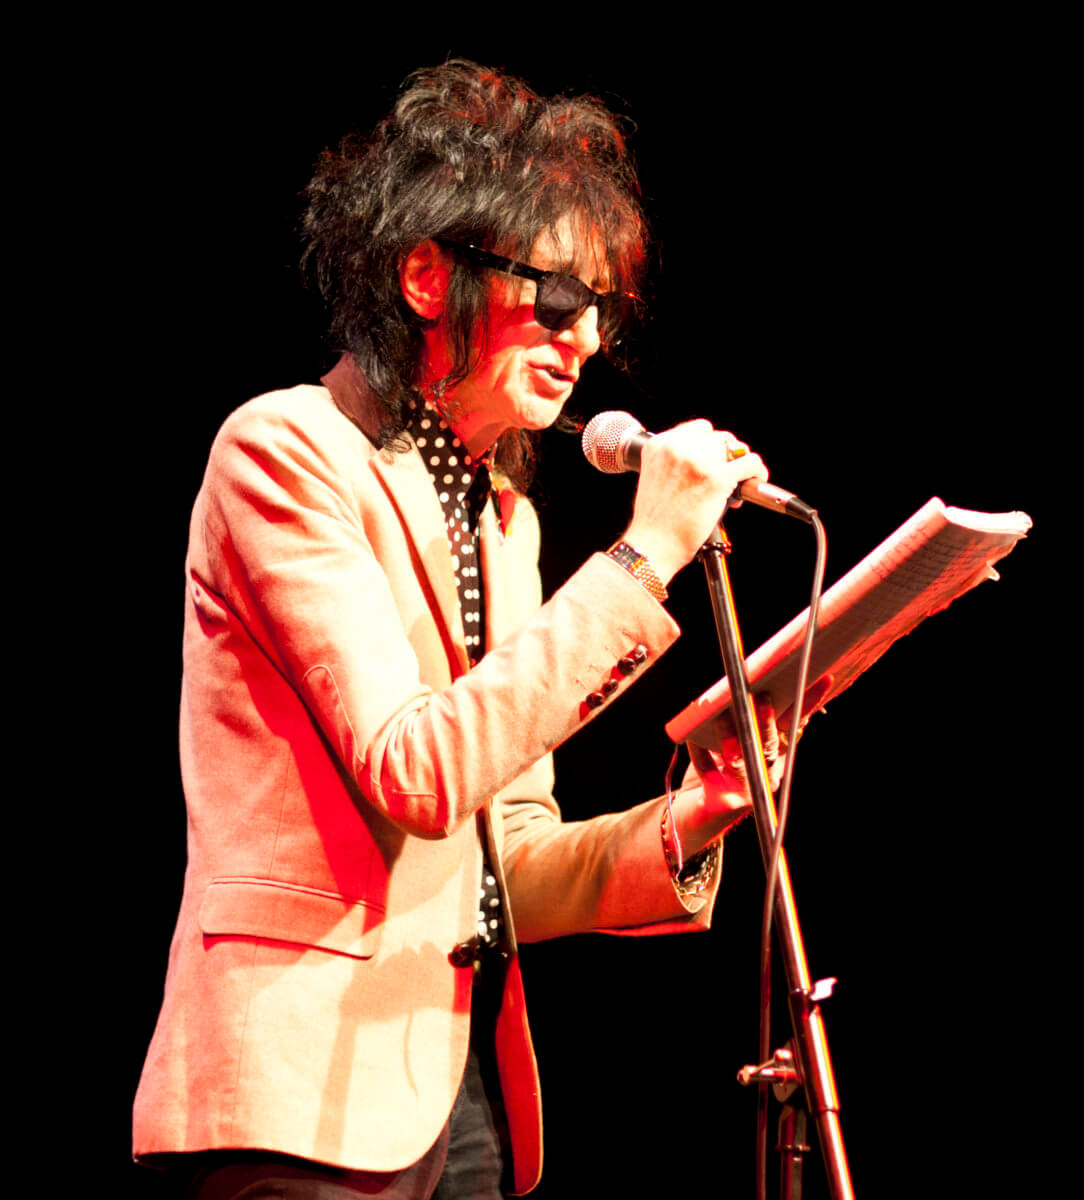 Punk pioneer John Cooper Clarke tours the U.S. after 30 years